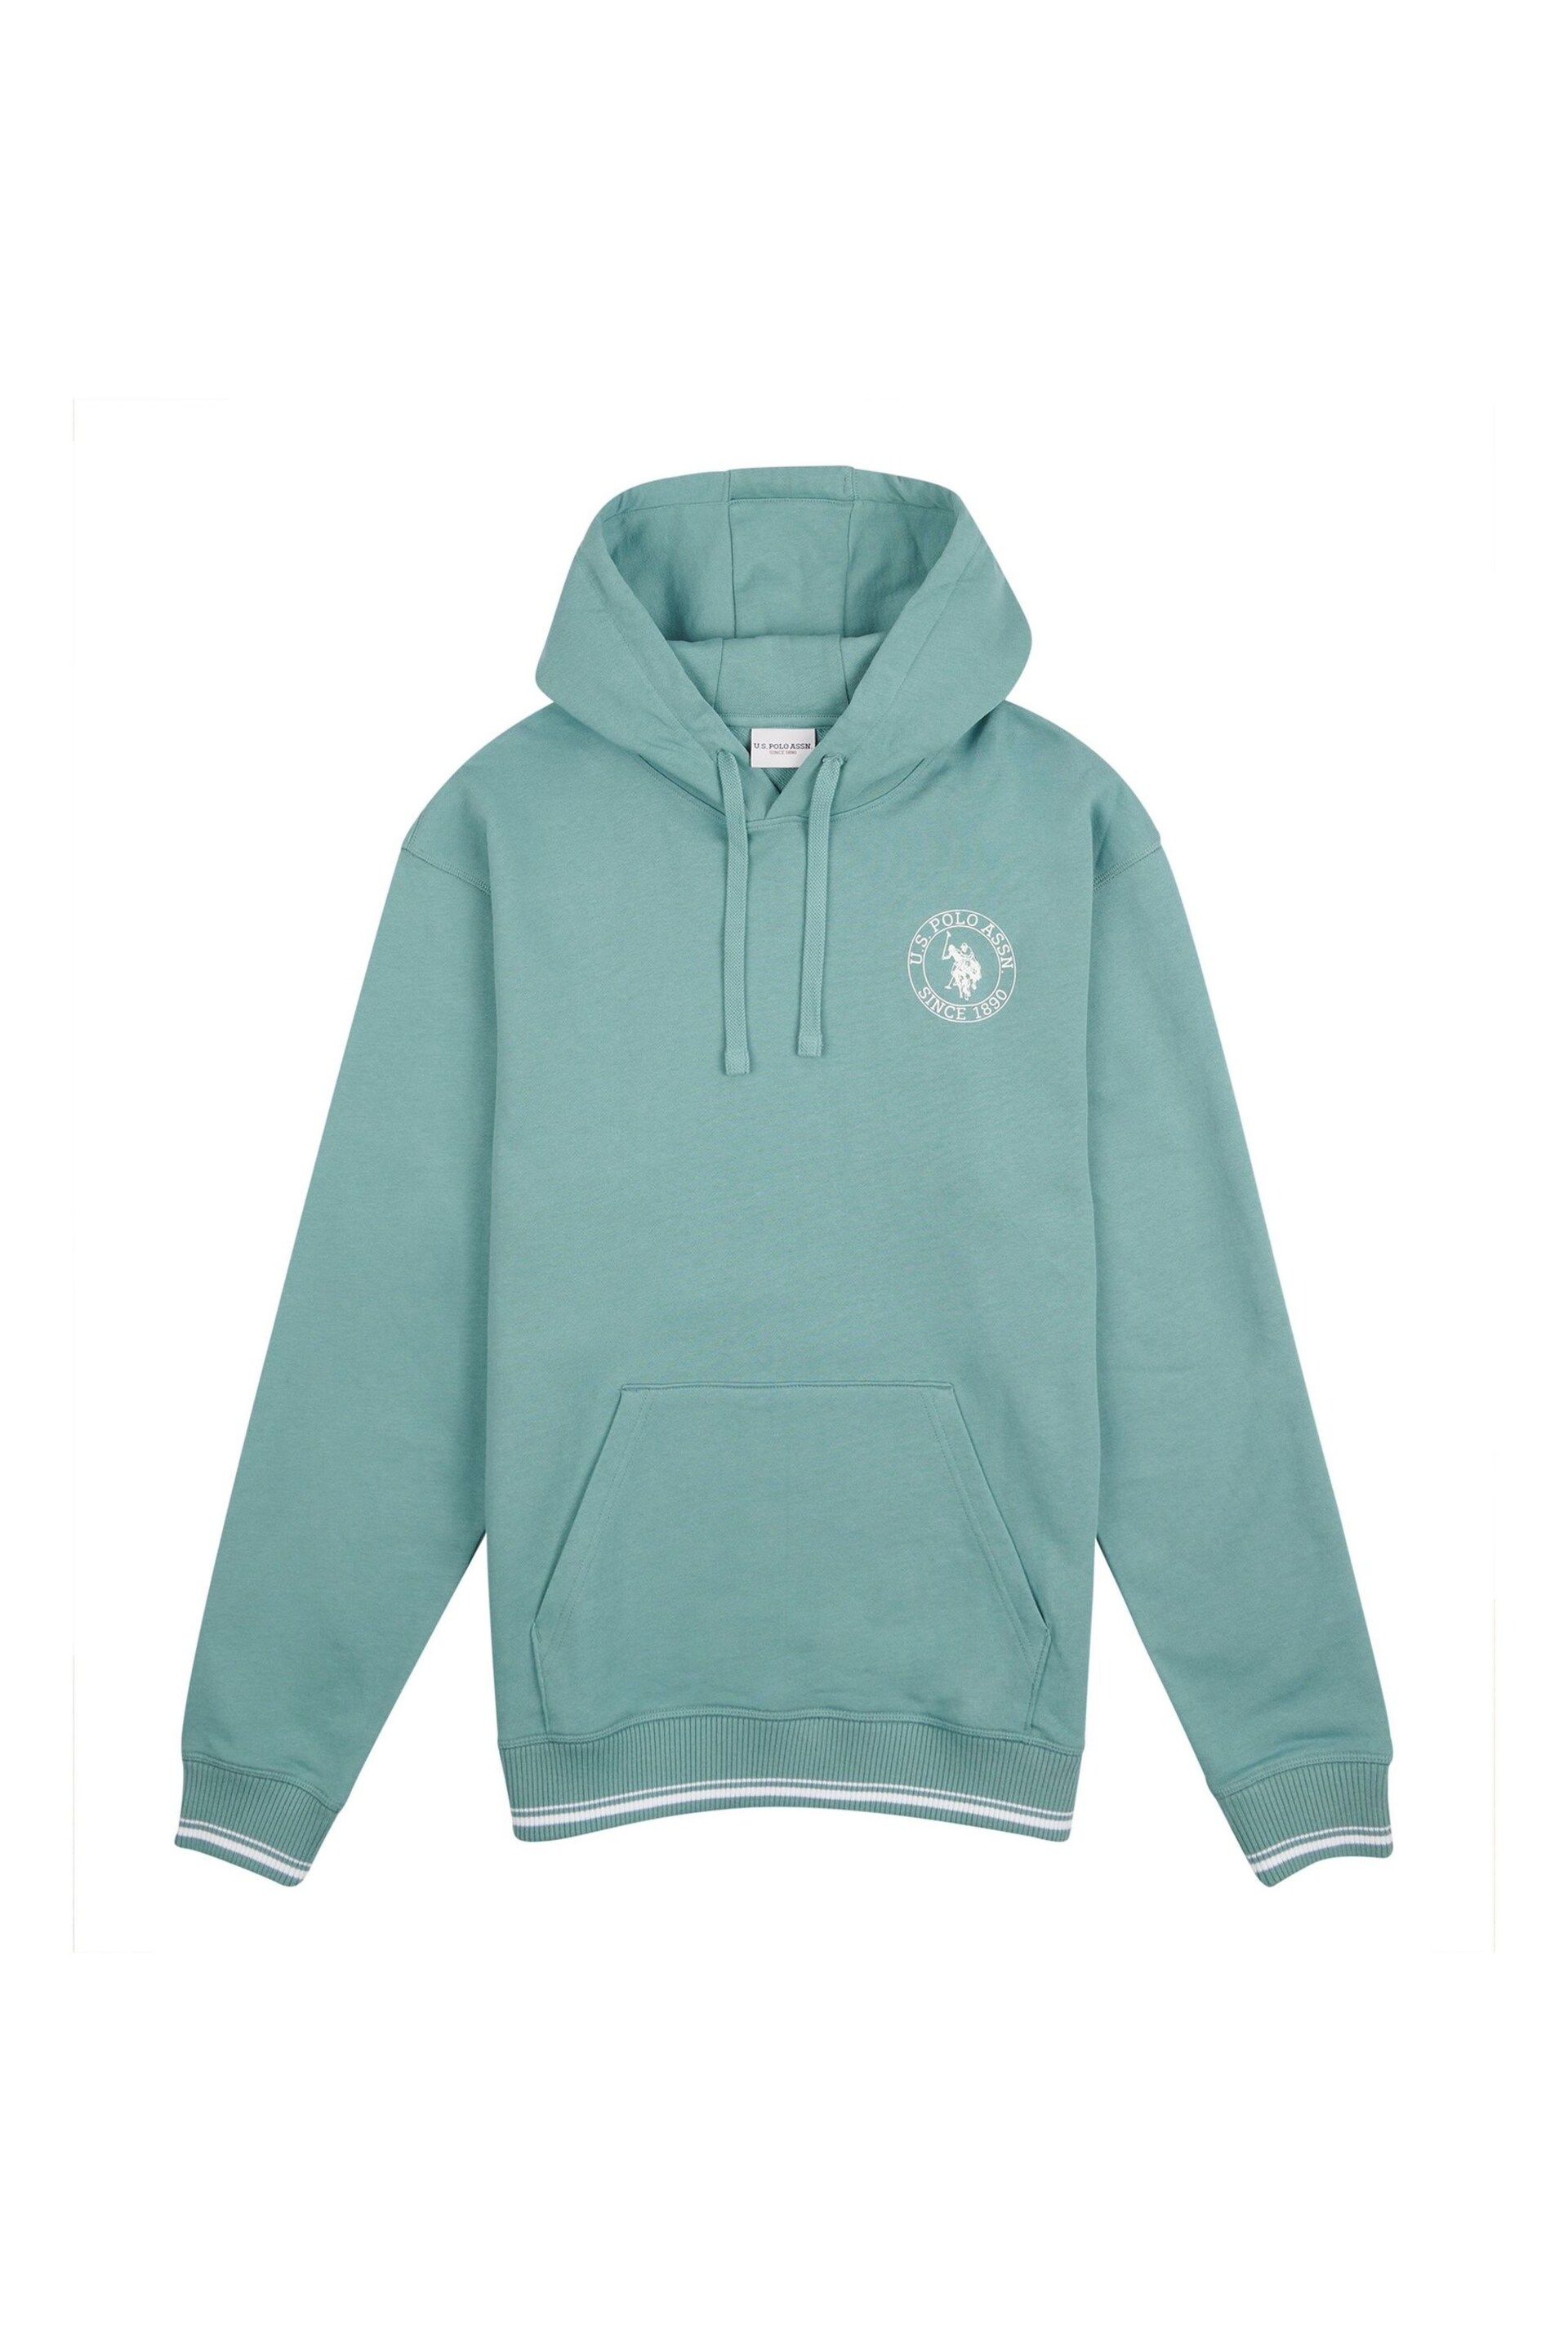 U.S. Polo Assn. Mens Blue Classic Fit Circle Print Hoodie - Image 7 of 10